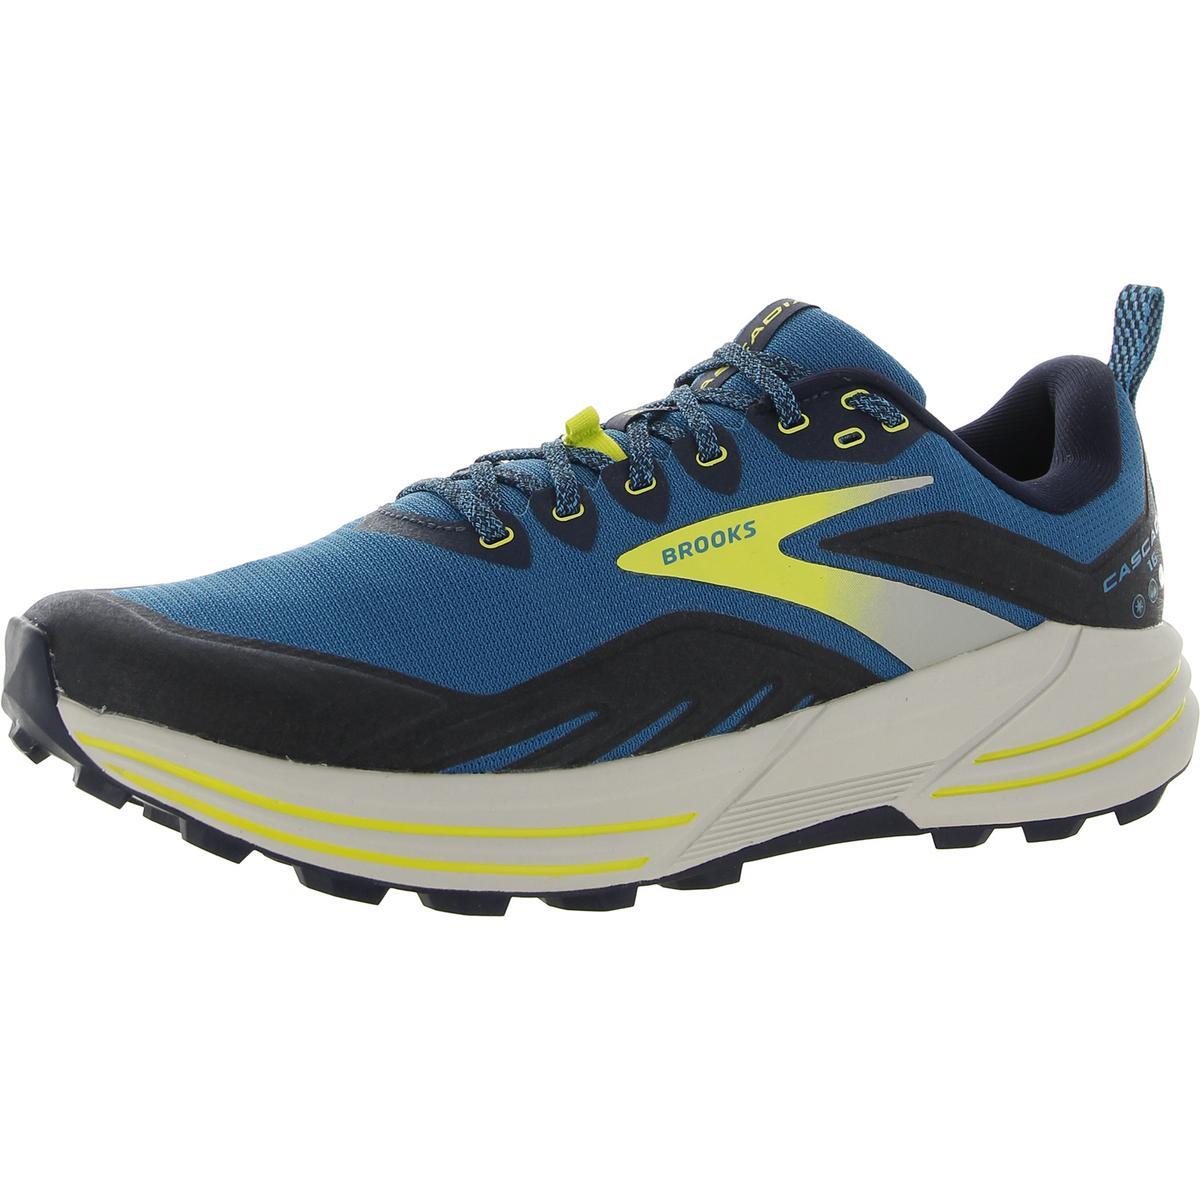 Brooks Mens Cascadia 16 Gym Athletic and Training Shoes Sneakers Bhfo 8779 Blue